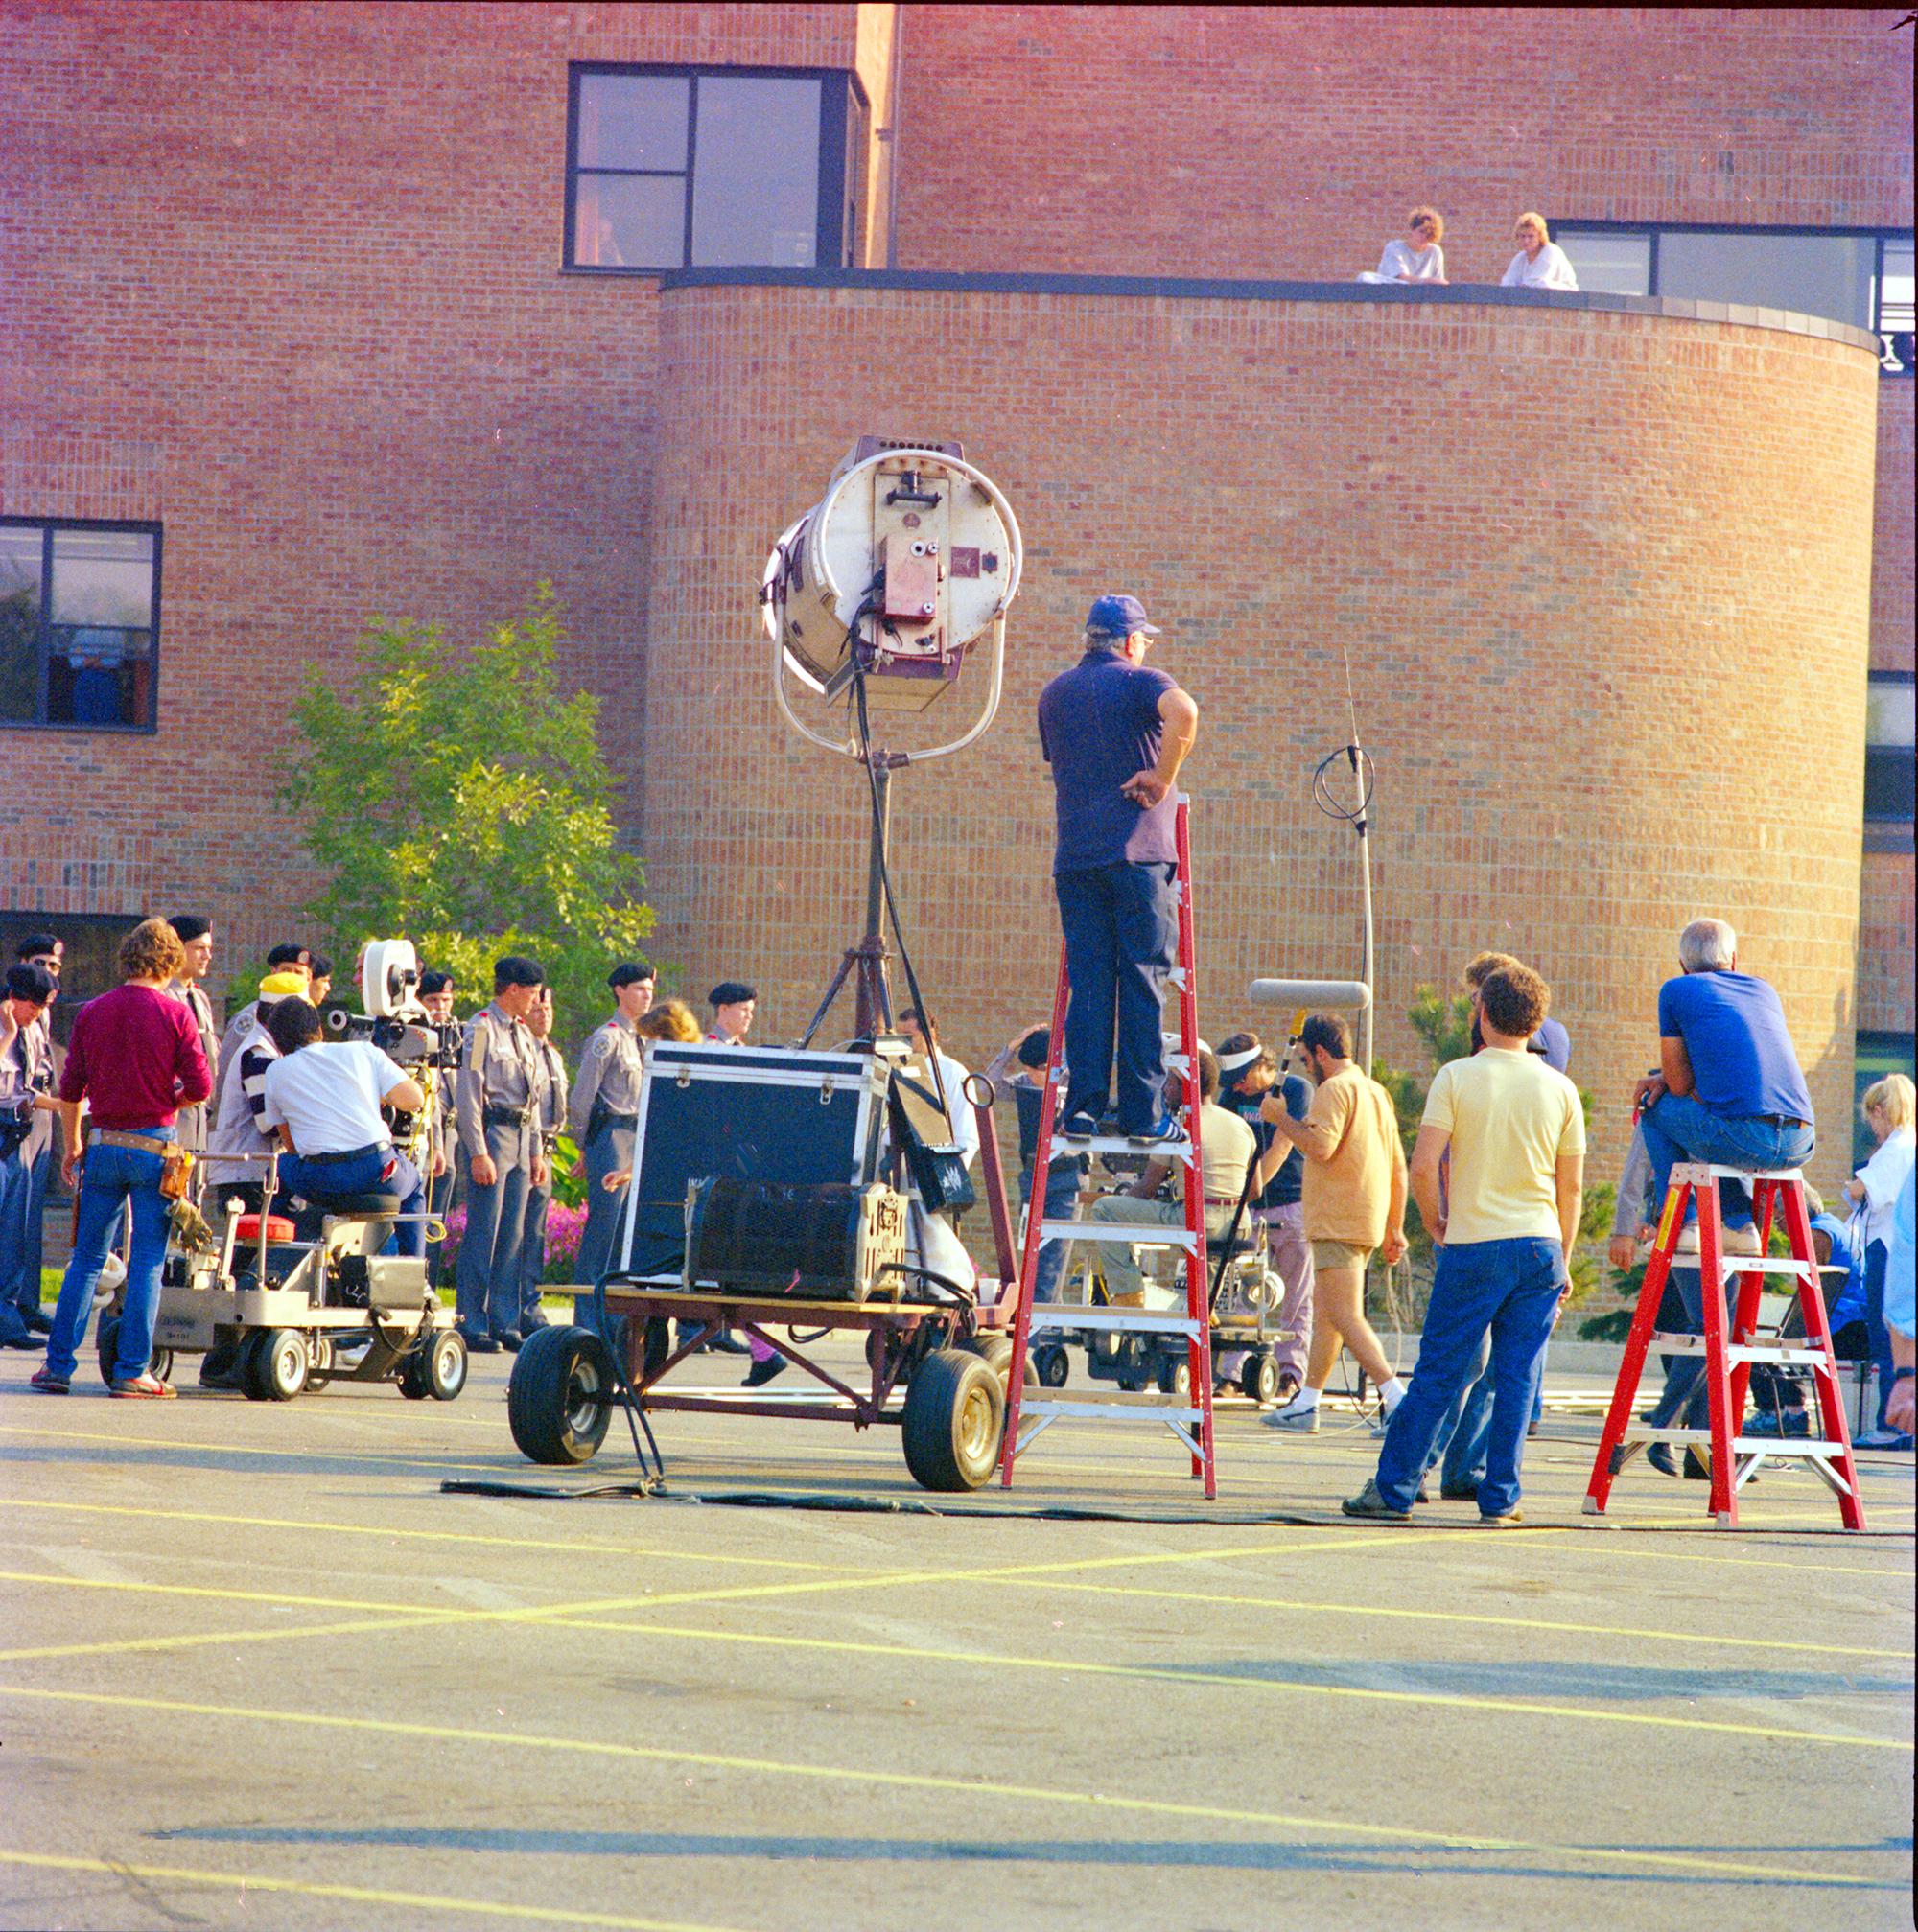 A film crew preparing to film a scene using cameras, lights and other film equipment.